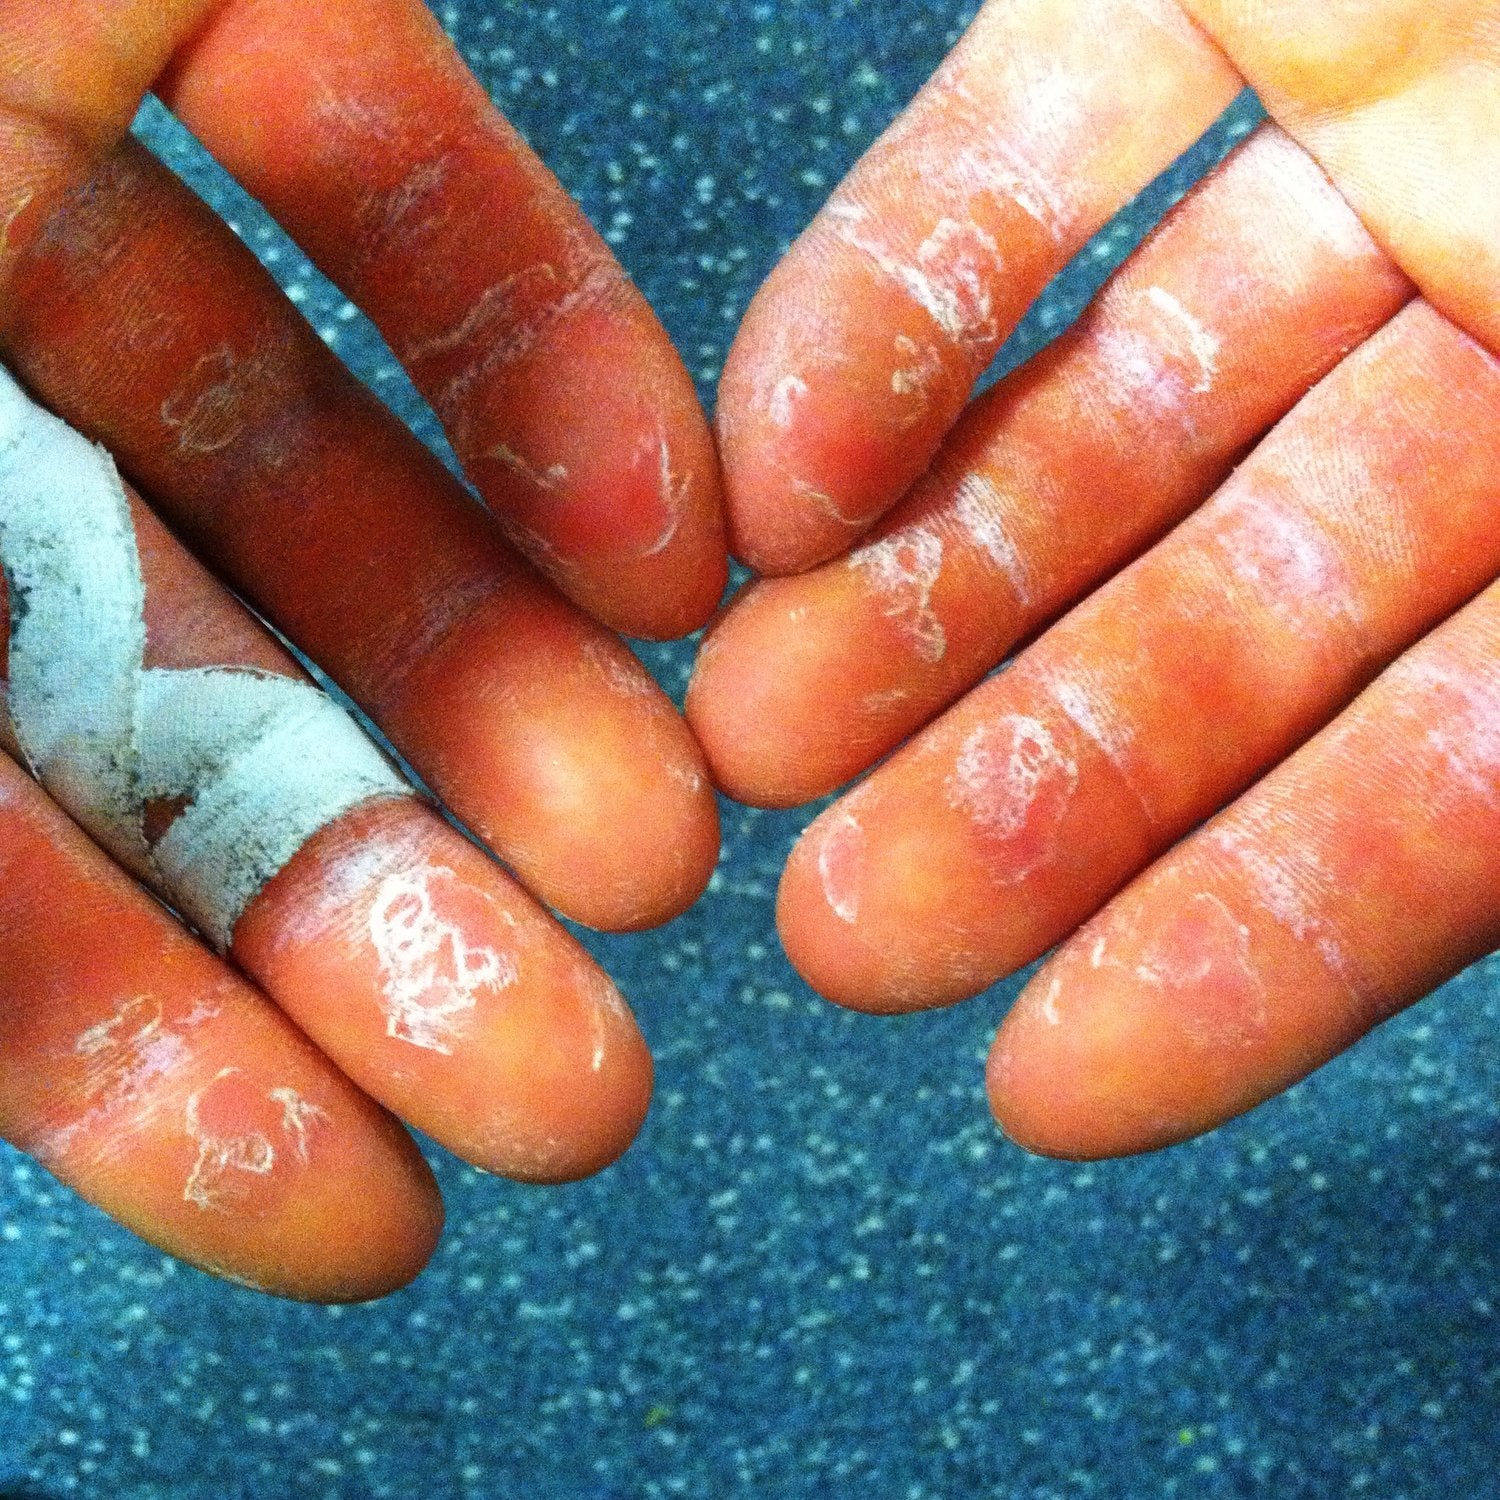 How to Care for Your Climbing Calluses (and prevent flappers) - Just Hand  Stuff